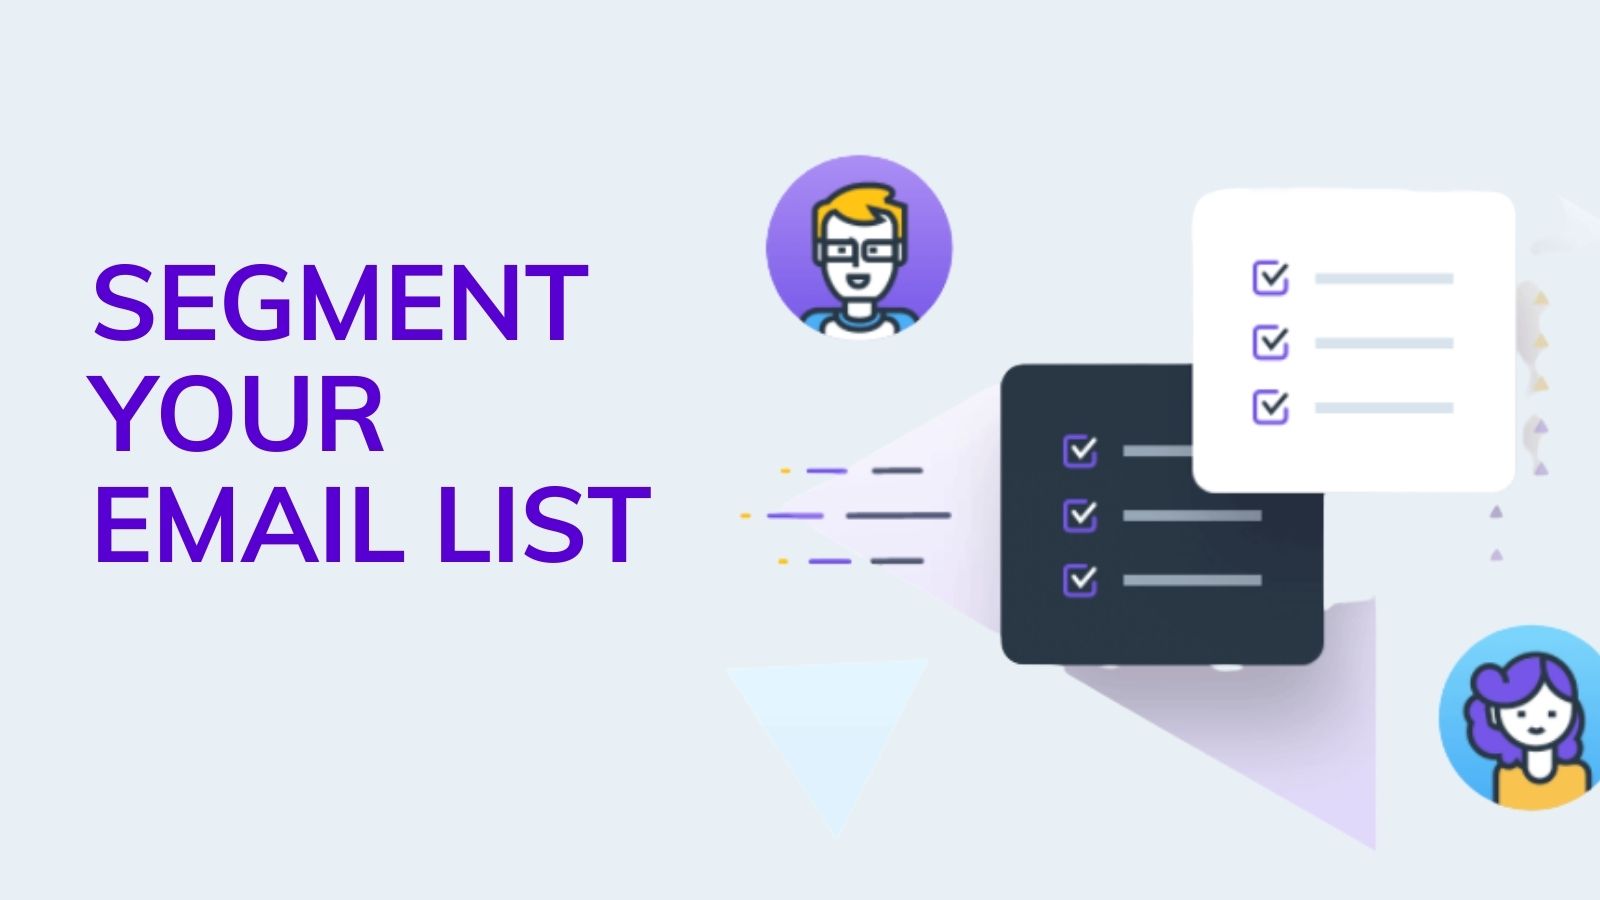 Segment your email list on agilitycms.com